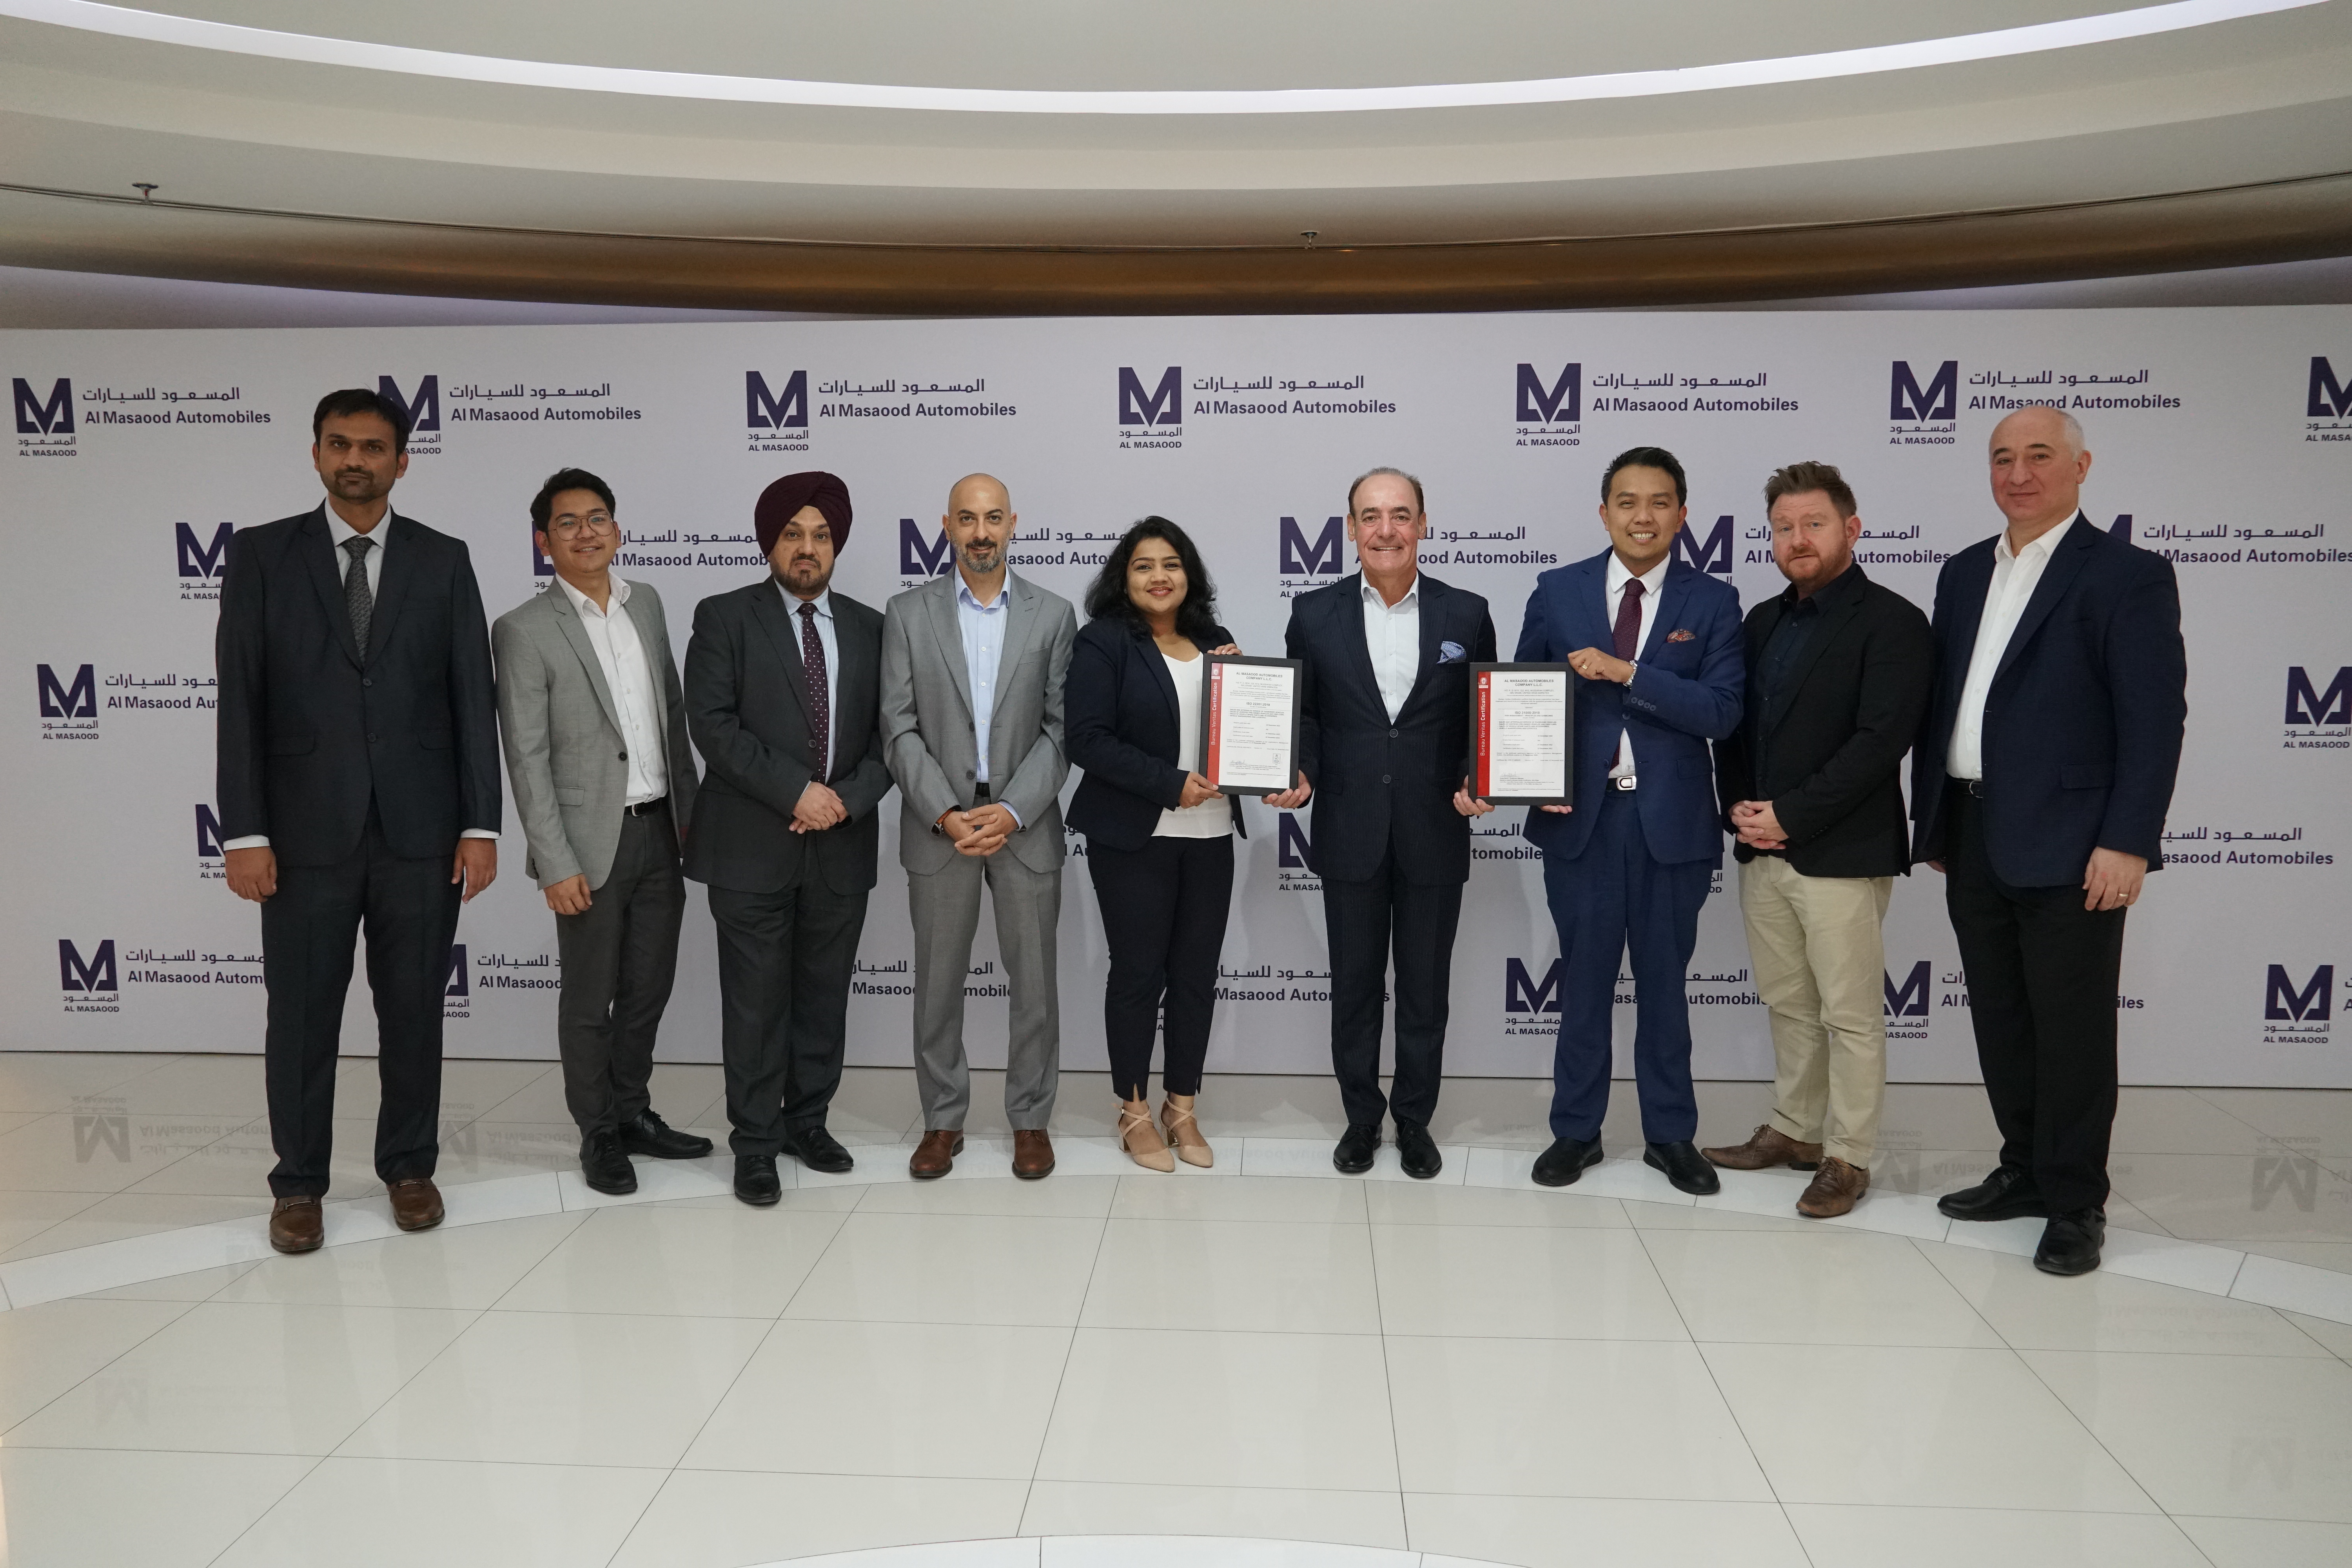 Al Masaood Automobiles Attains ISO 22301:2019 and ISO 31000:2018 Certifications for Risk Management and Business Continuity Practices